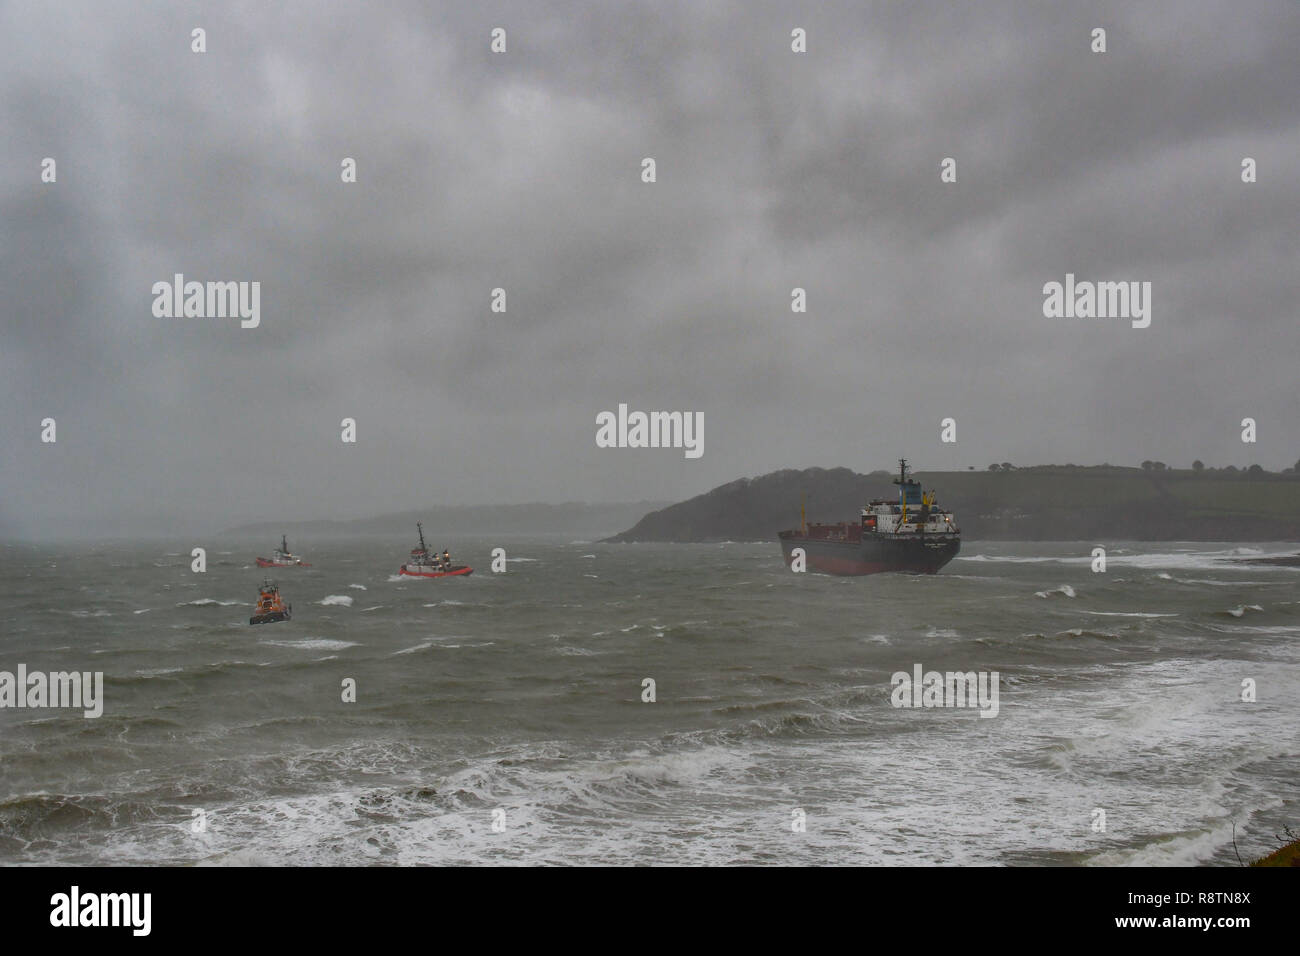 Falmouth, Cornwall, UK. 18th Dec, 2018. A huge Russian tanker has run aground on a beach at Falmouth early this morning. Coastguards have closed roads in the area as they declare a major operation. 18 Russian crew man are supposed to be on board. Credit: Simon Maycock/Alamy Live News Stock Photo